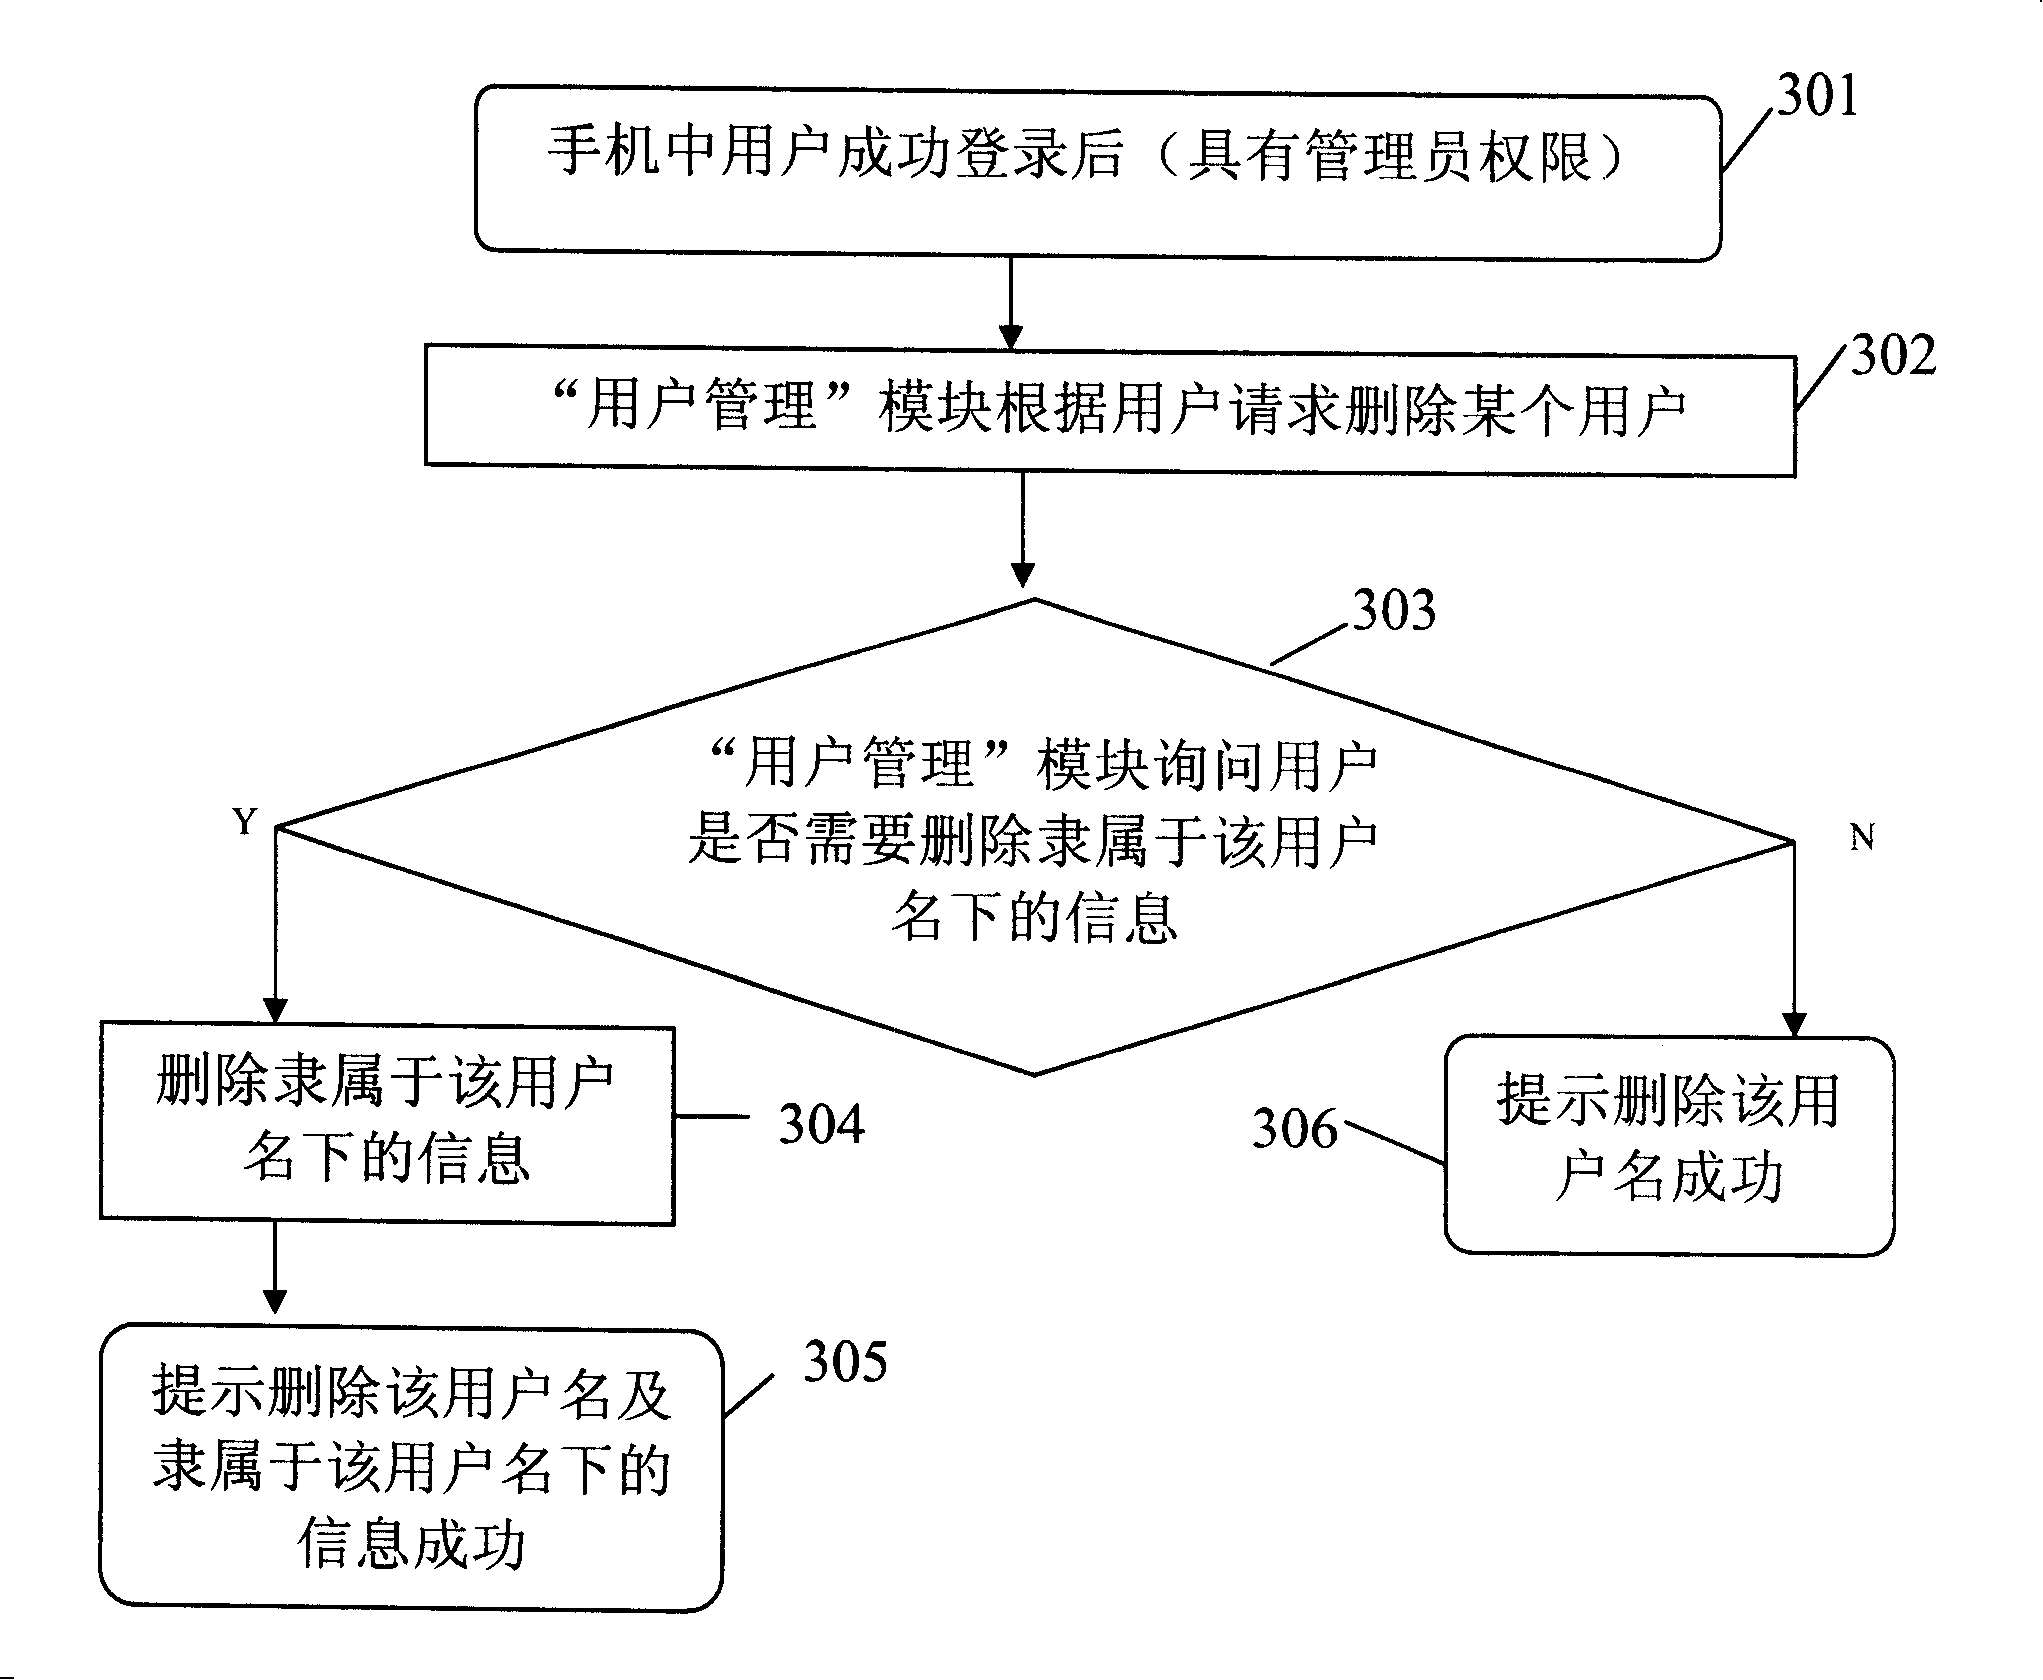 Method for implementing multi-user management and information hiding in mobile phone